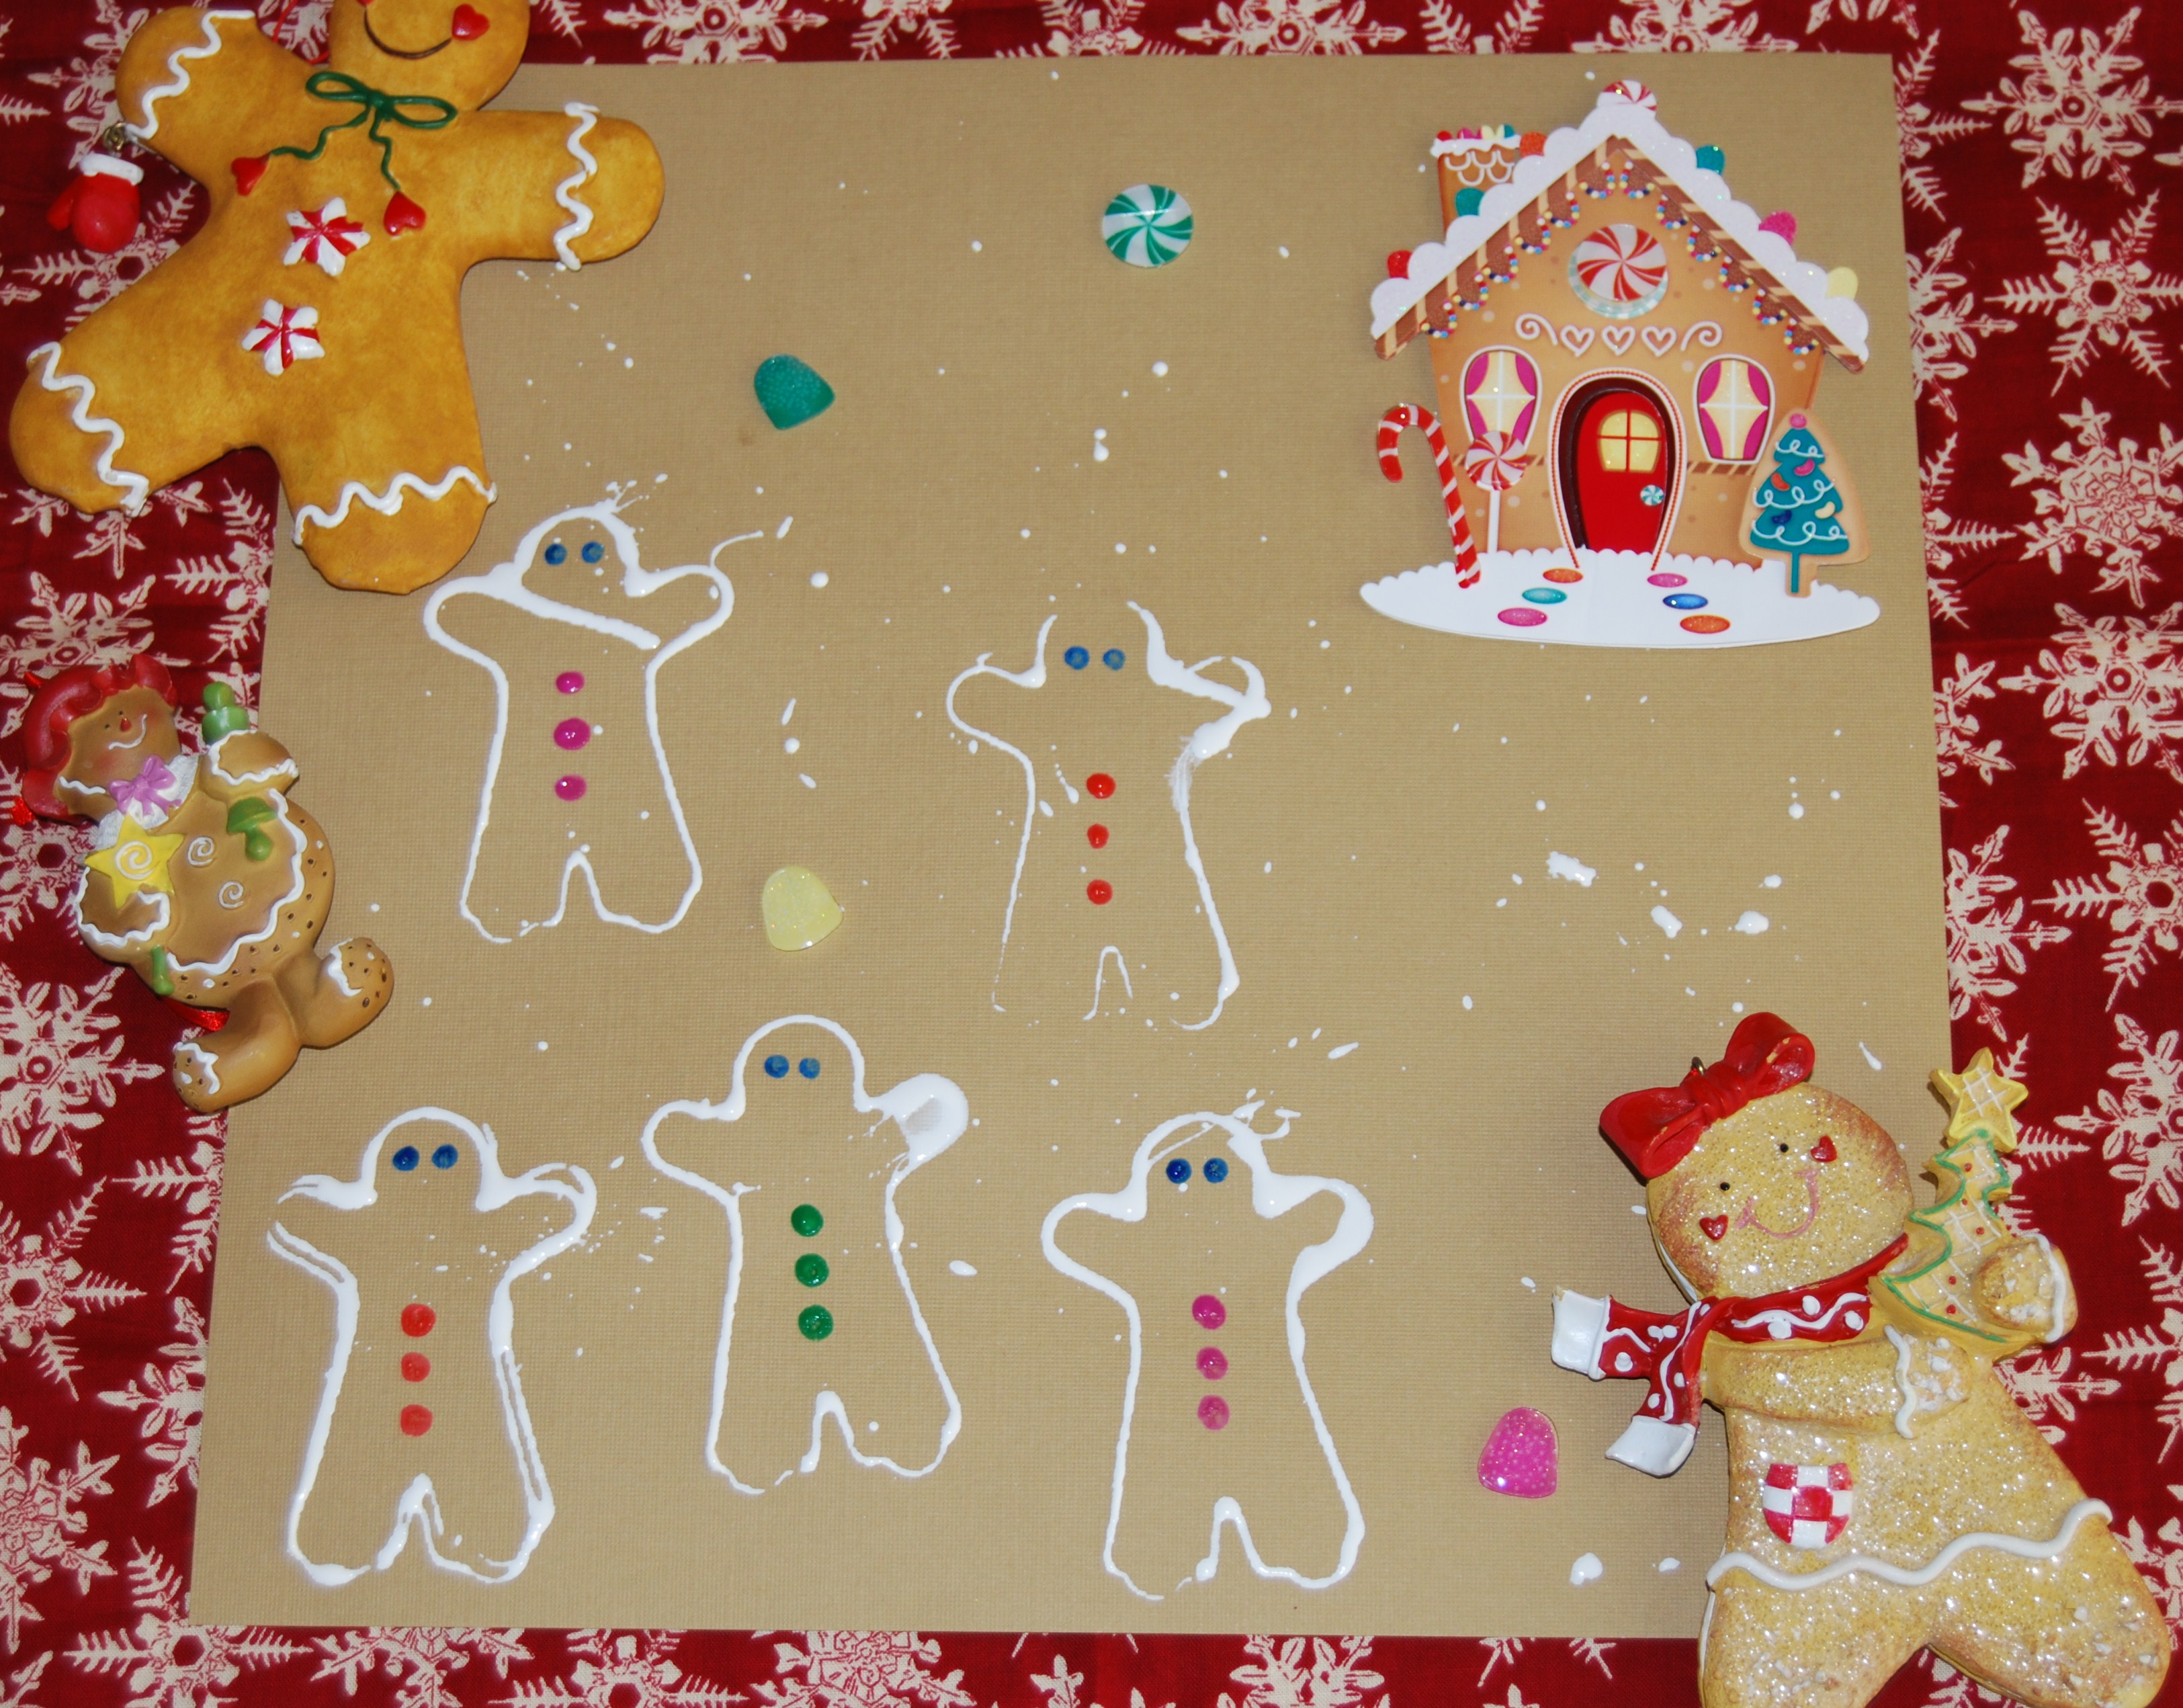 Gingerbread Cookie Cutter and "Splatter" Paintings